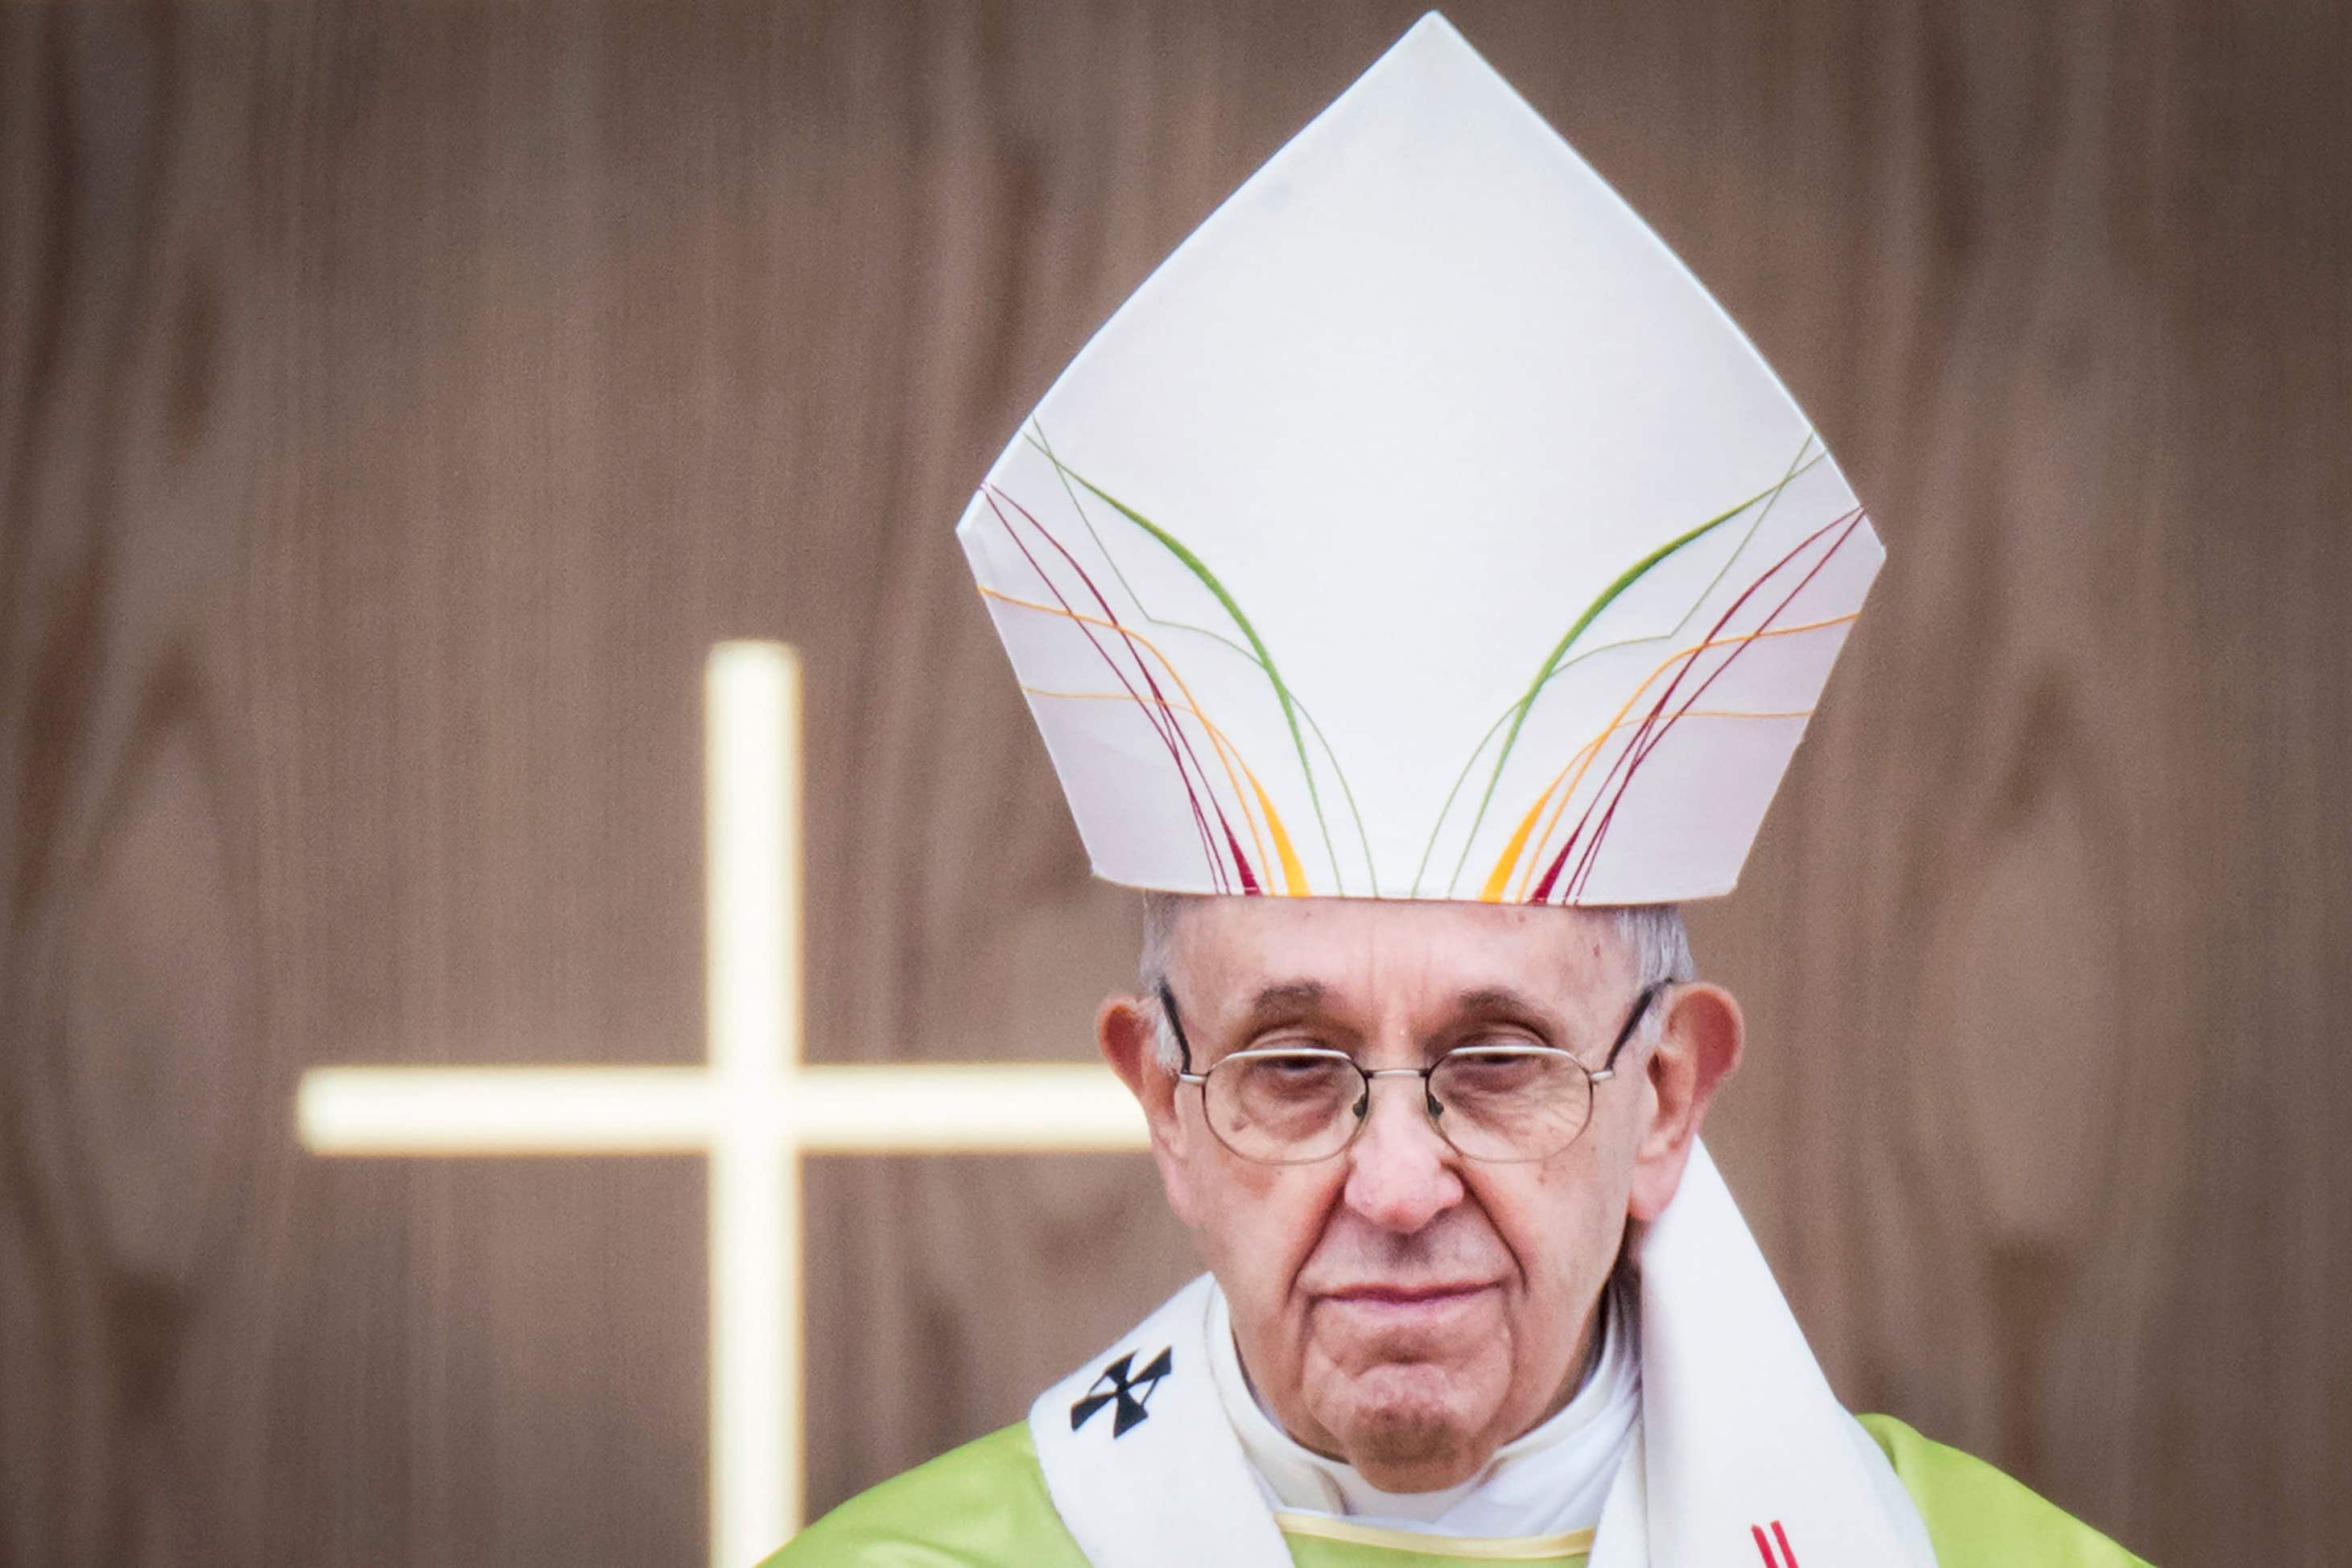 The Pope could bring about a major reduction in global carbon emissions, researchers claim